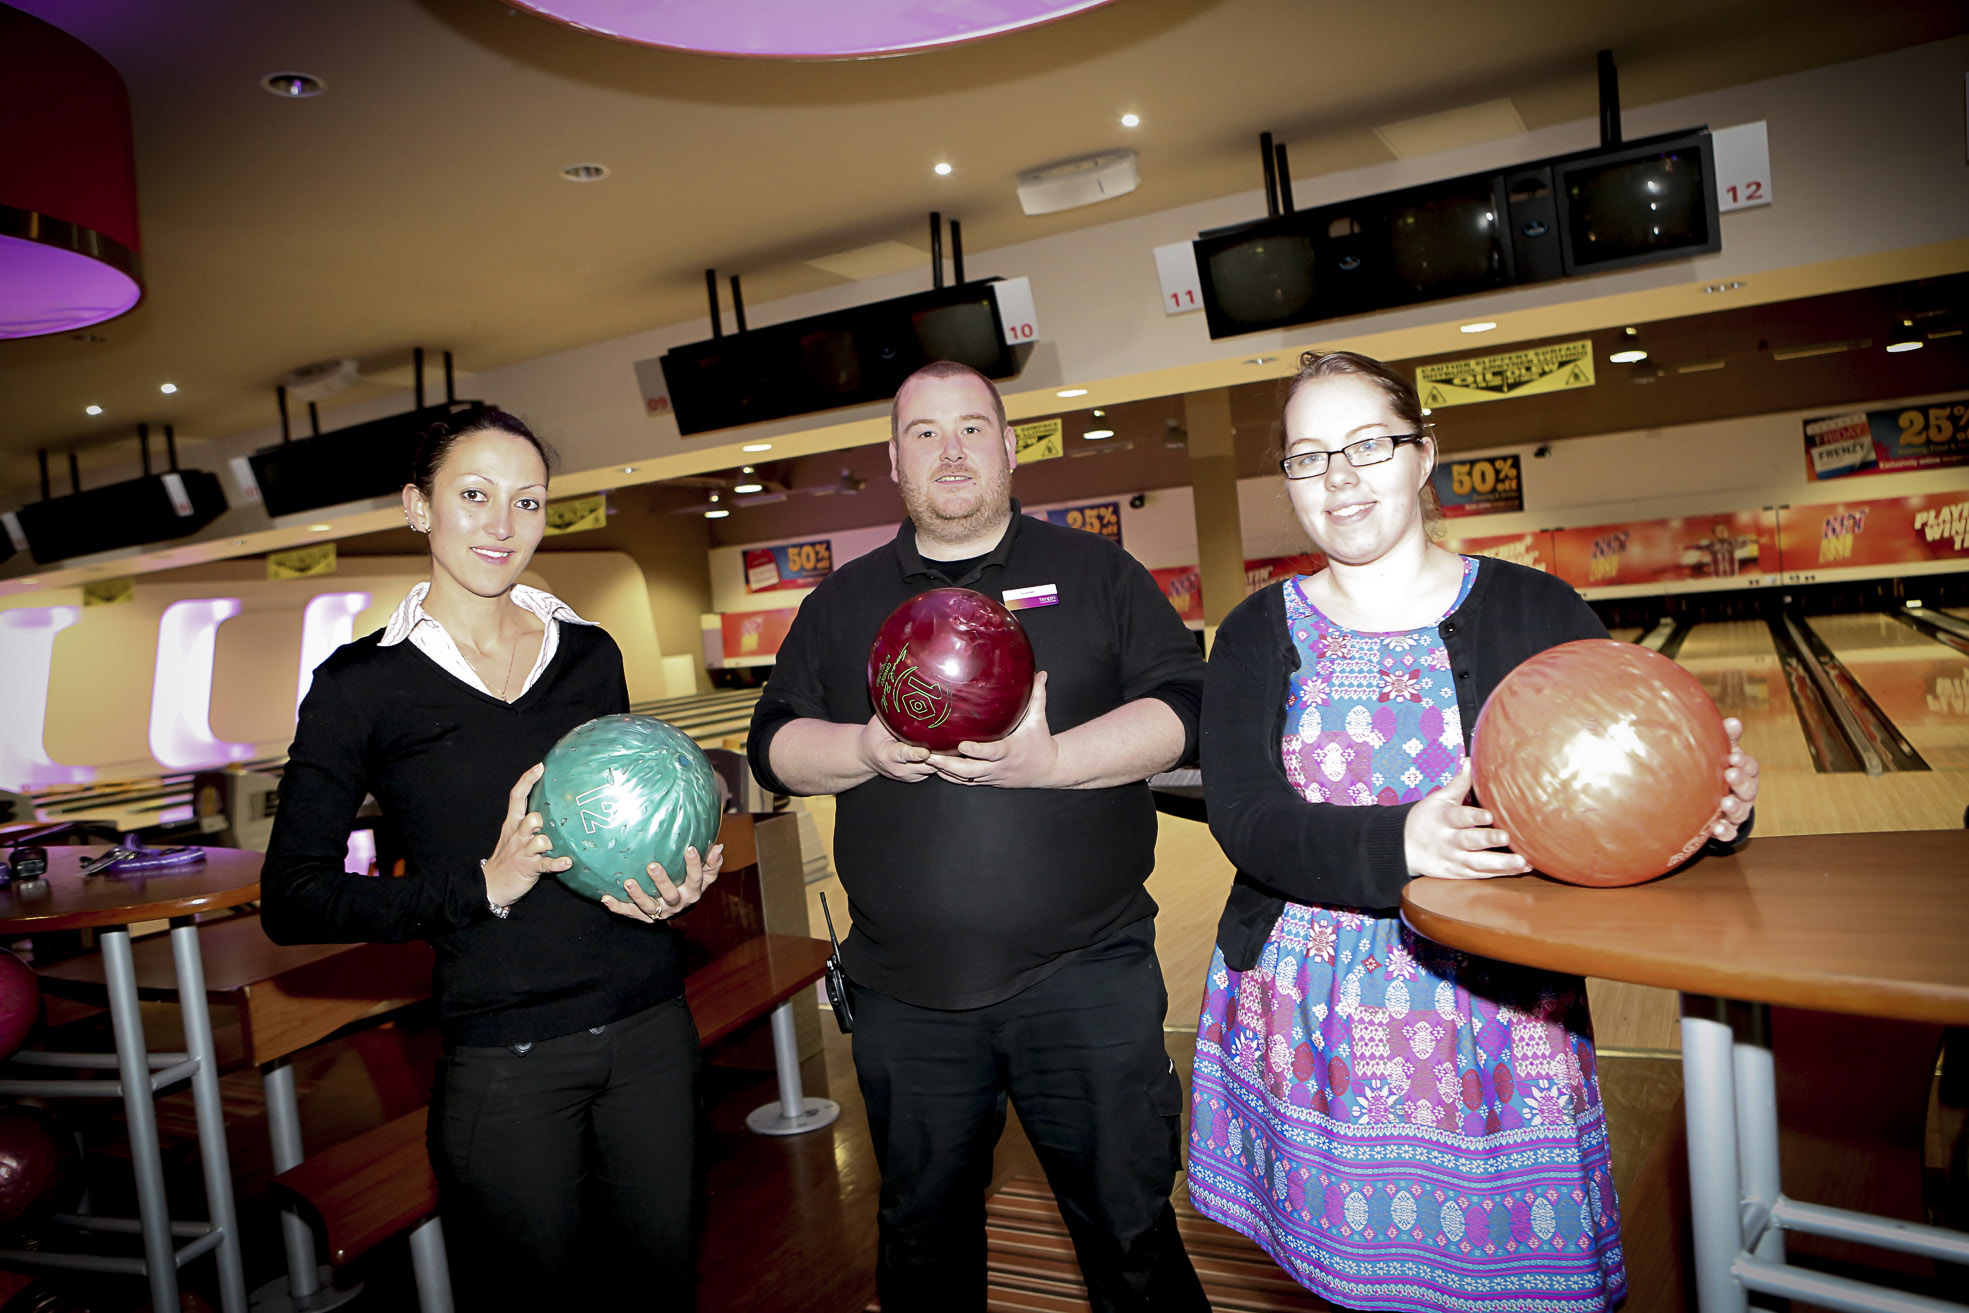 Children’s hospice bowled over by team’s generosity